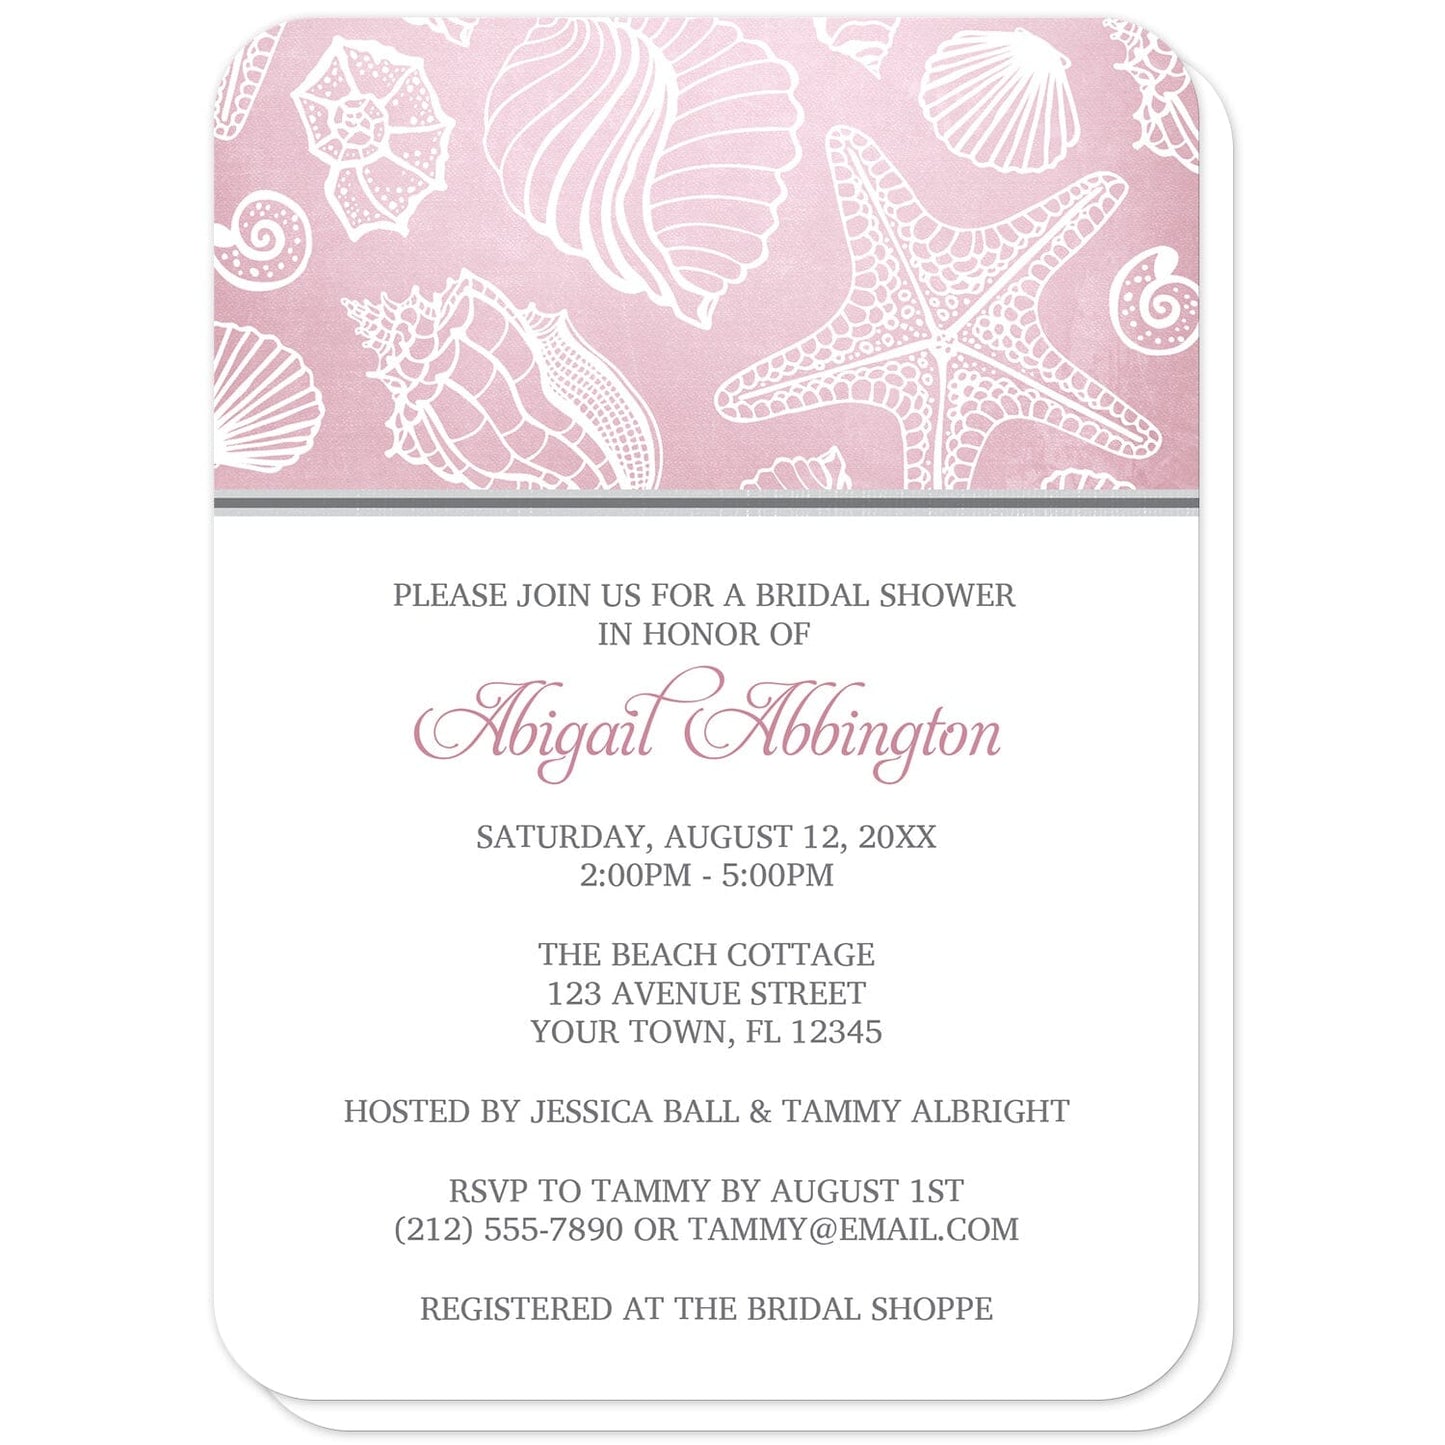 Pink Beach Seashell Pattern Bridal Shower Invitations (with rounded corners) at Artistically Invited. Pink beach seashell pattern bridal shower invitations with a white line seashell pattern over an organic-like beachy pink background. Your personalized bridal shower celebration details are custom printed in pink and gray on white below the pink seashell pattern. 